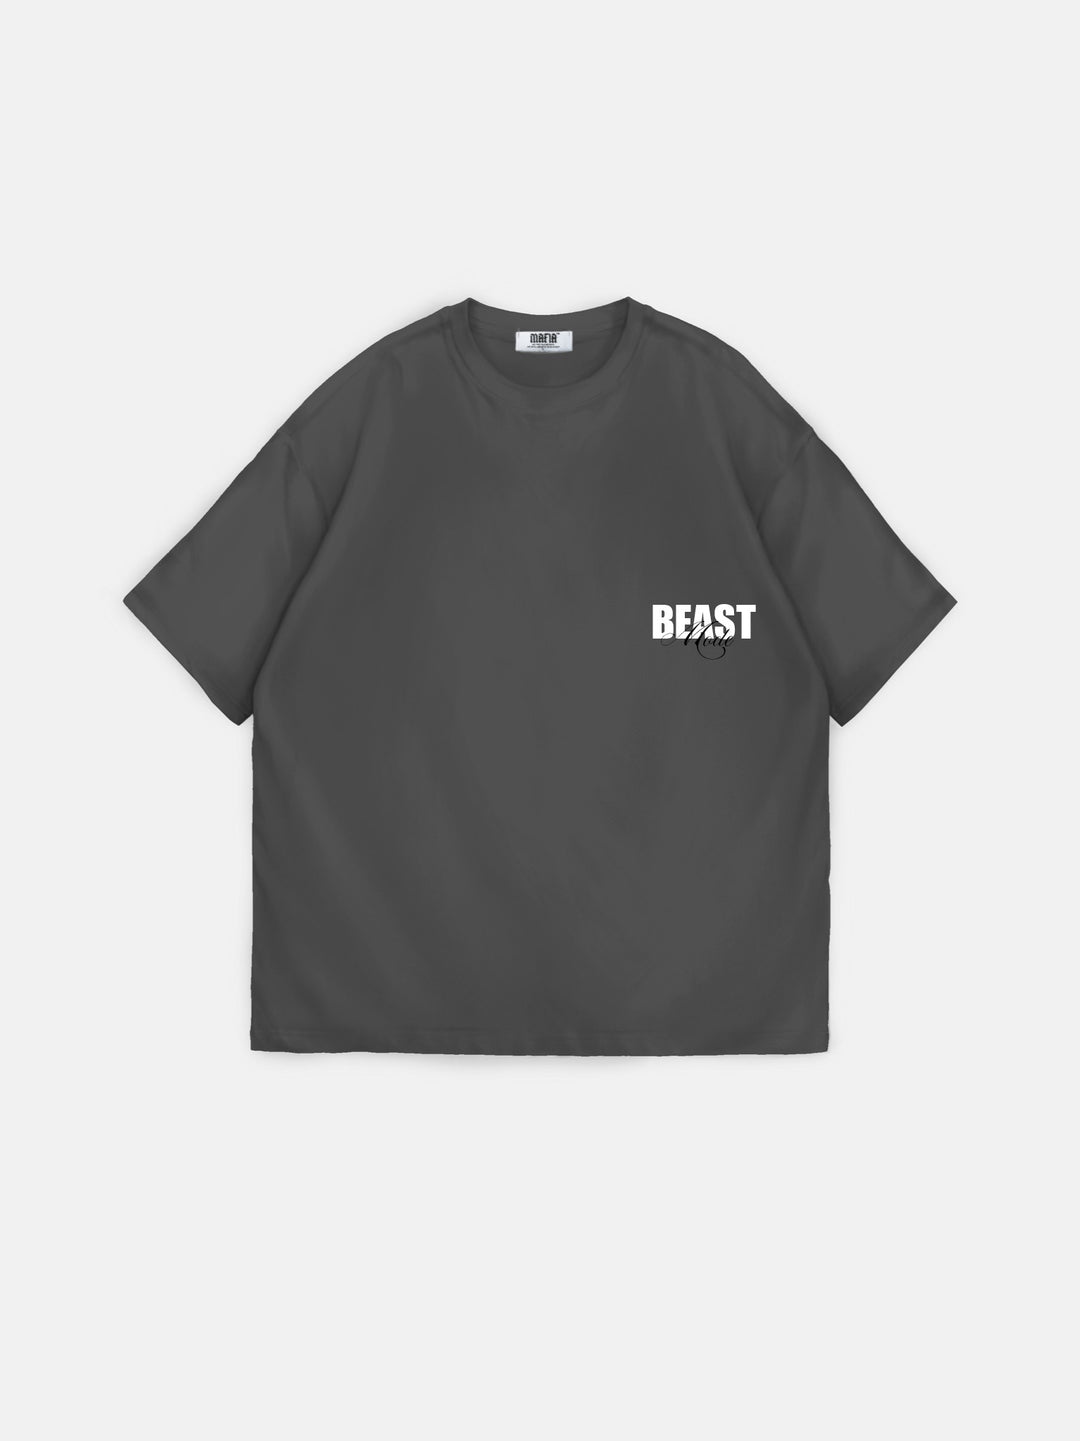 Oversize Beast T-shirt - Anthracite and White